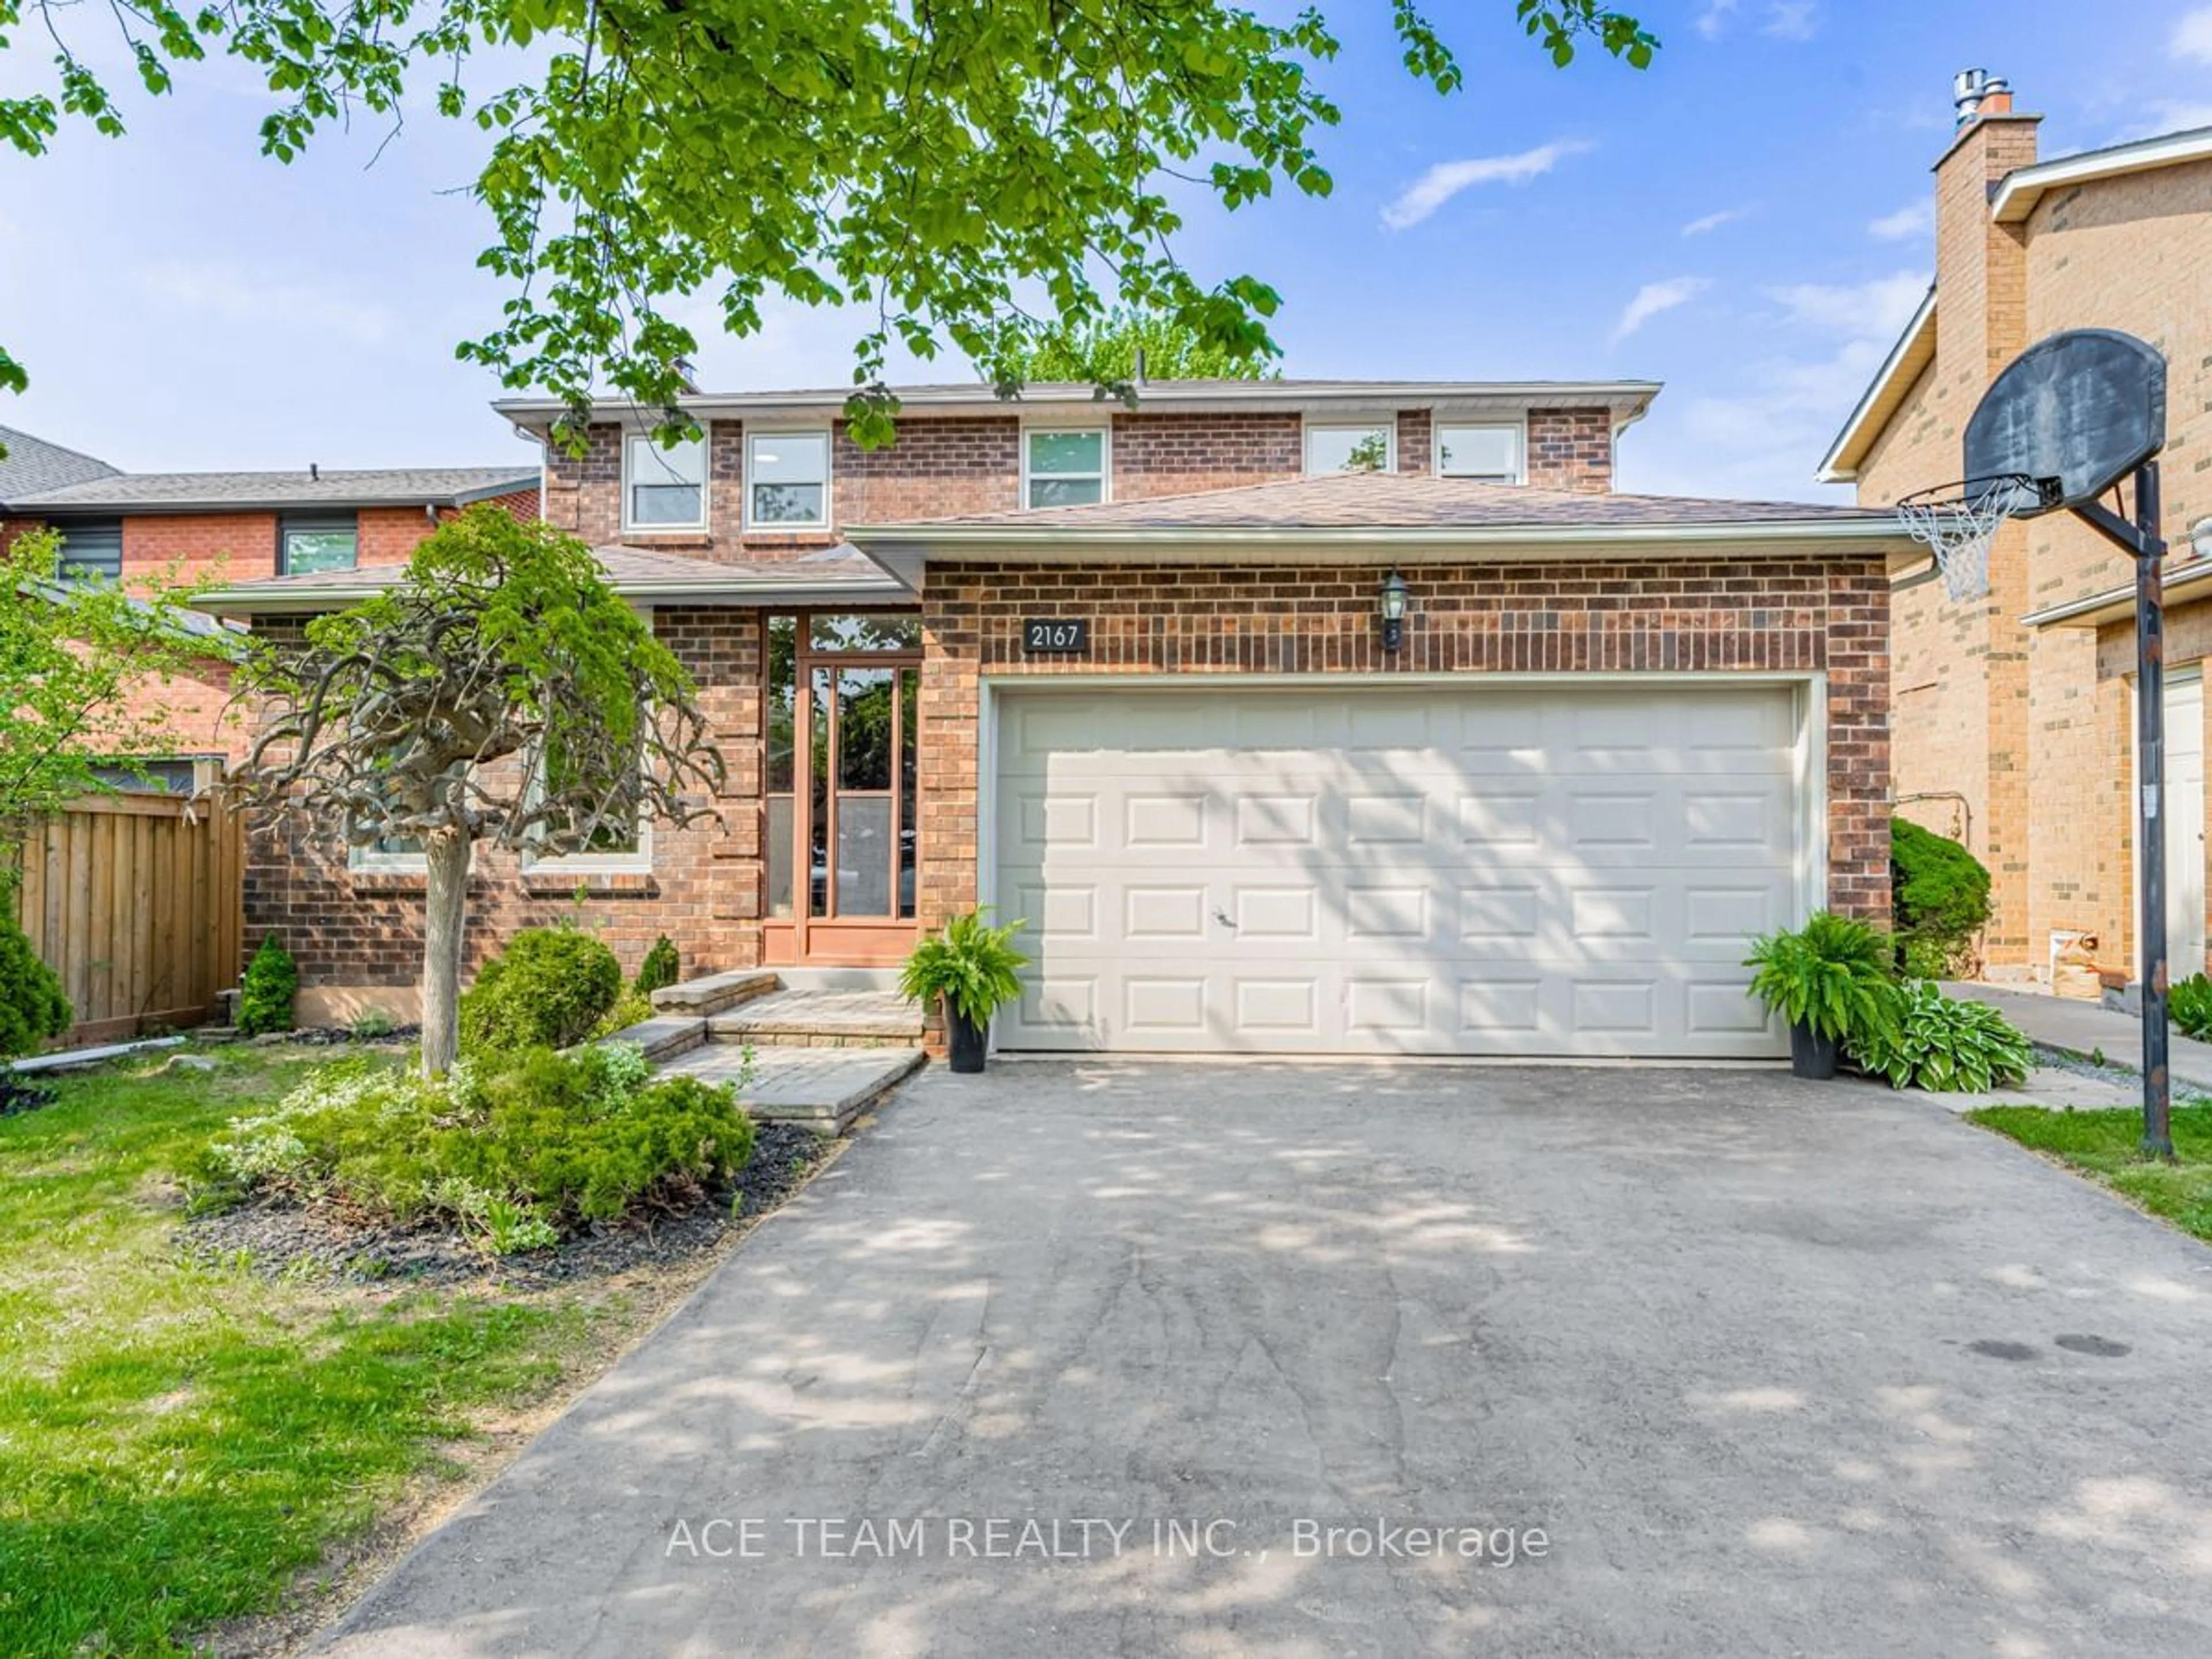 Home with brick exterior material for 2167 Margot St, Oakville Ontario L6H 3M5